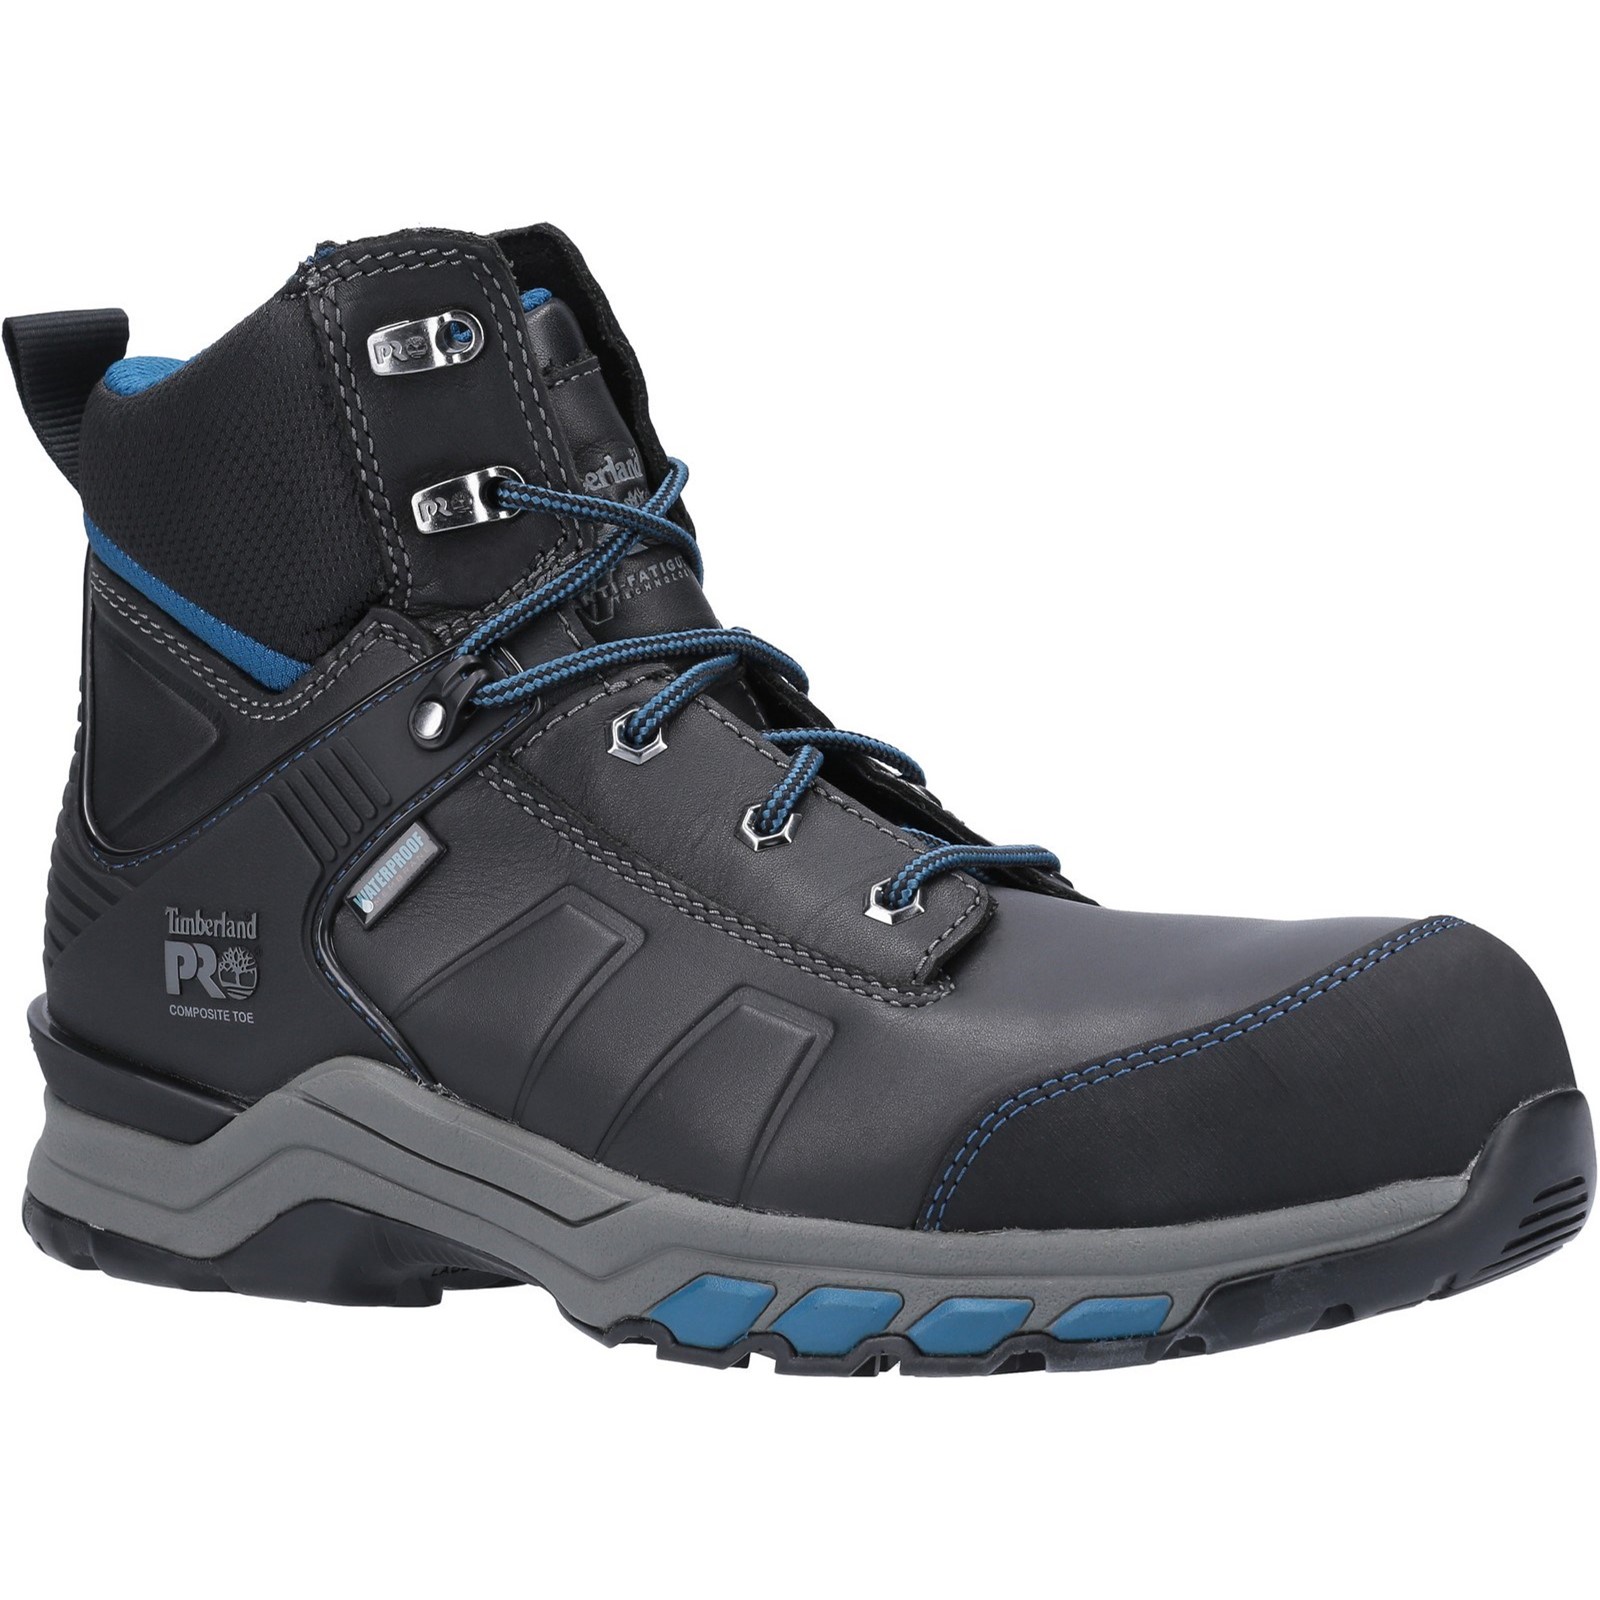 Hypercharge Composite Safety Toe Work Boot Black/Teal